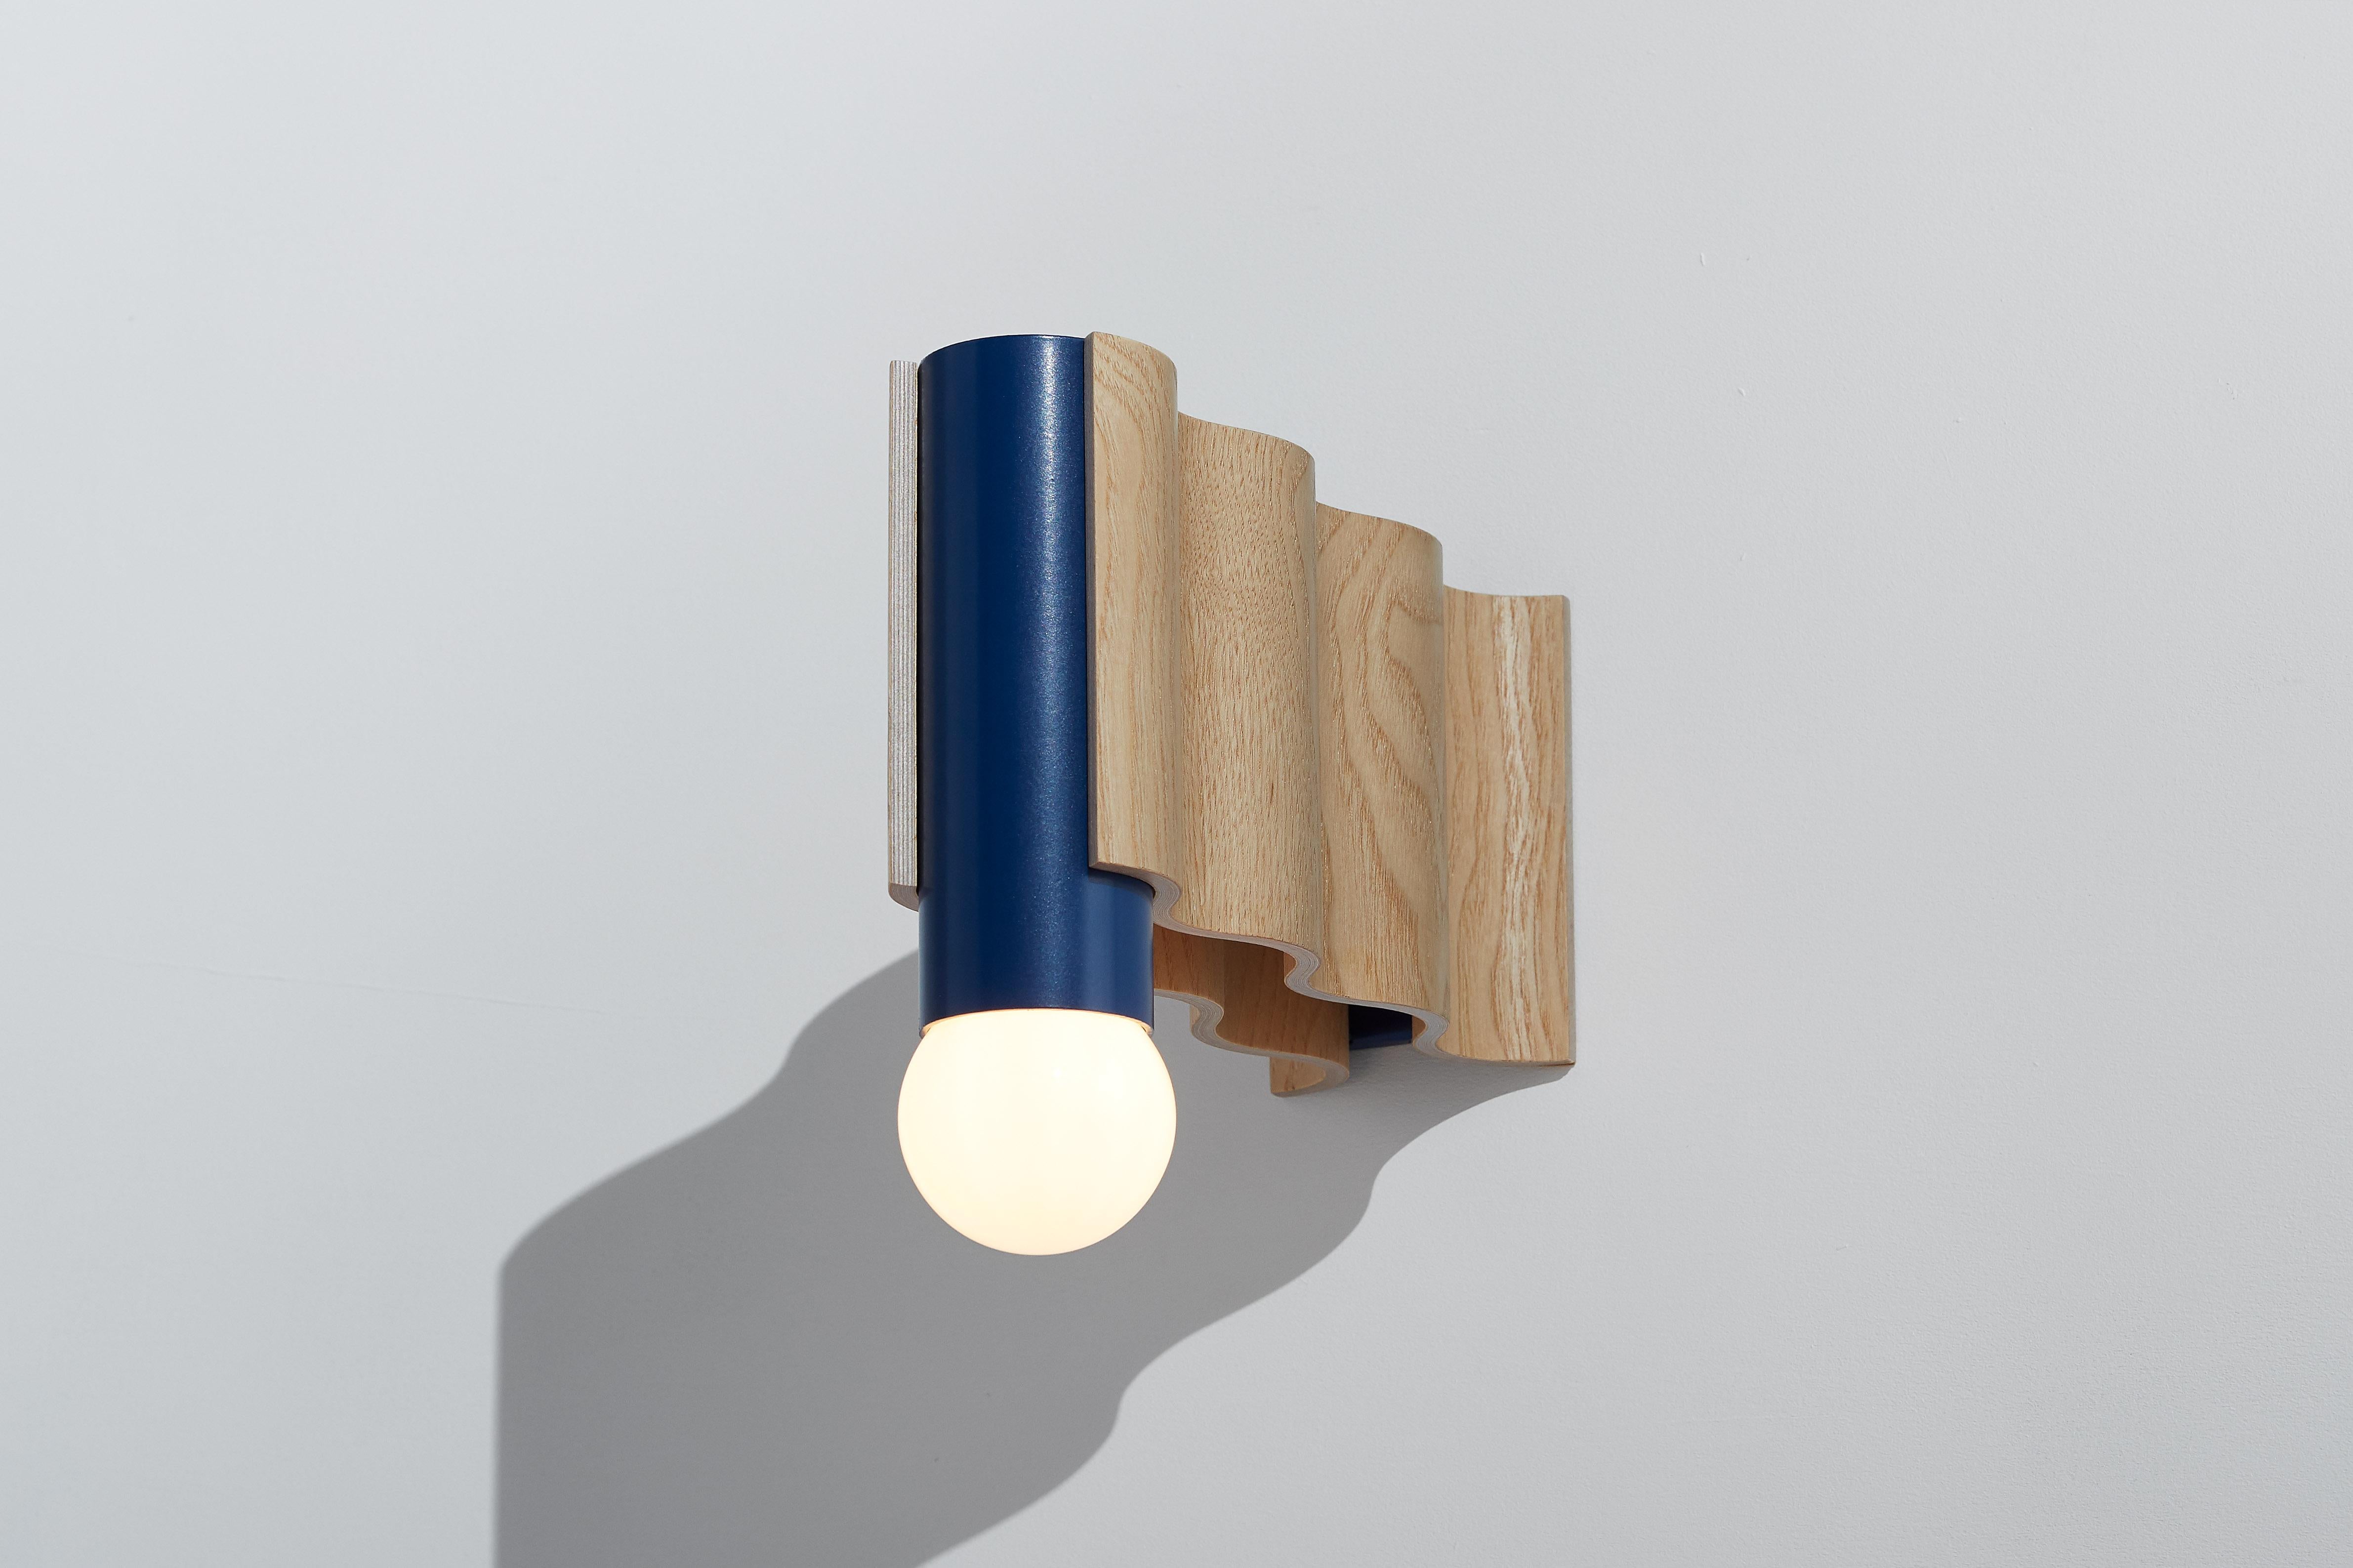 Single sconce made from natural ash veneered plywood (clear coated) and sapphire blue powder-coated aluminium tube.

Technical information:
- Comes with dimmable bulb (Class A60, 8W, 720 Lumen, 3000° Kelvin, A+ energy rating, Ra > 80)
- Can be wired